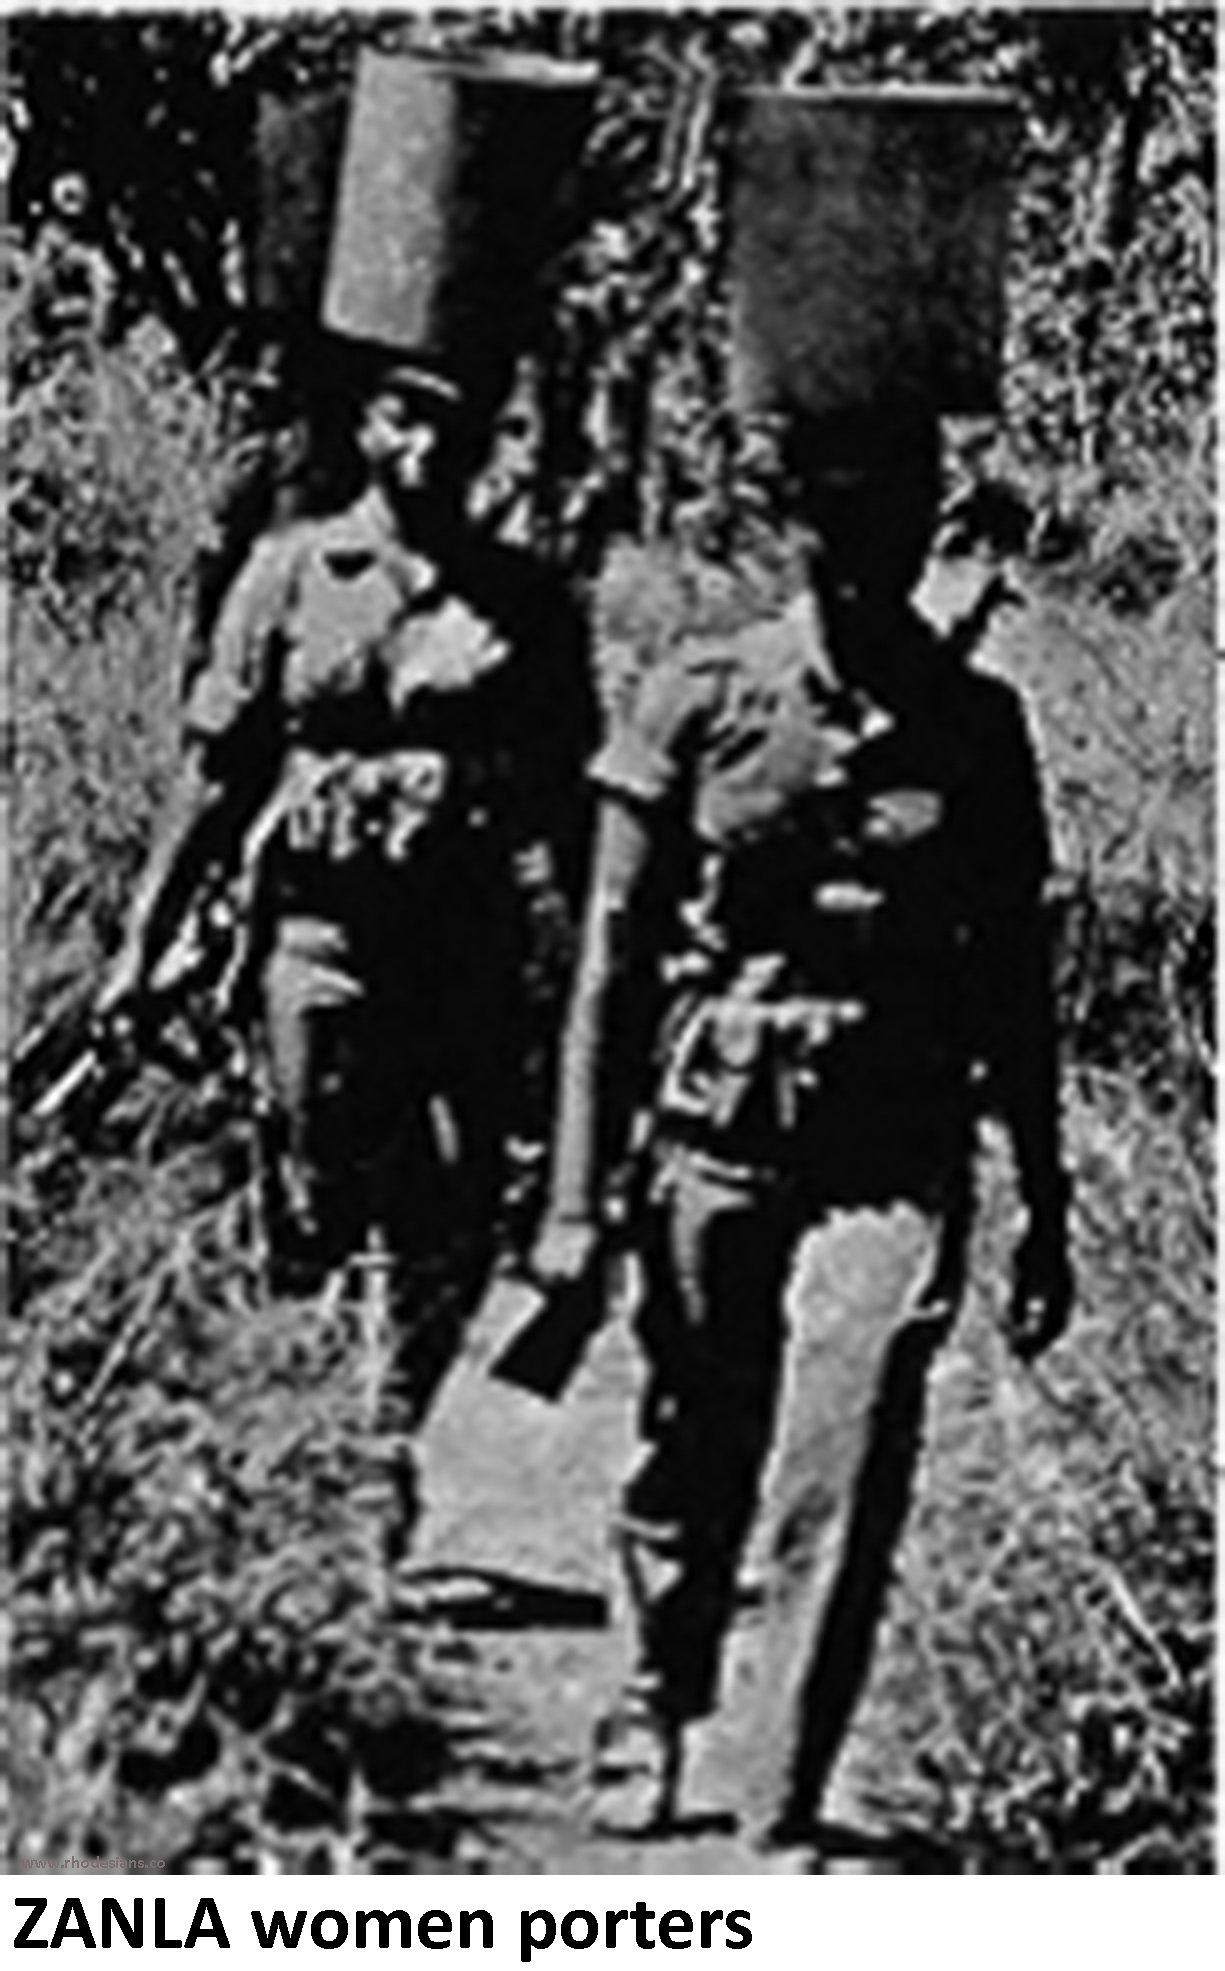 ZANLA women porters with AK47 rifles carrying stores from Mozambique